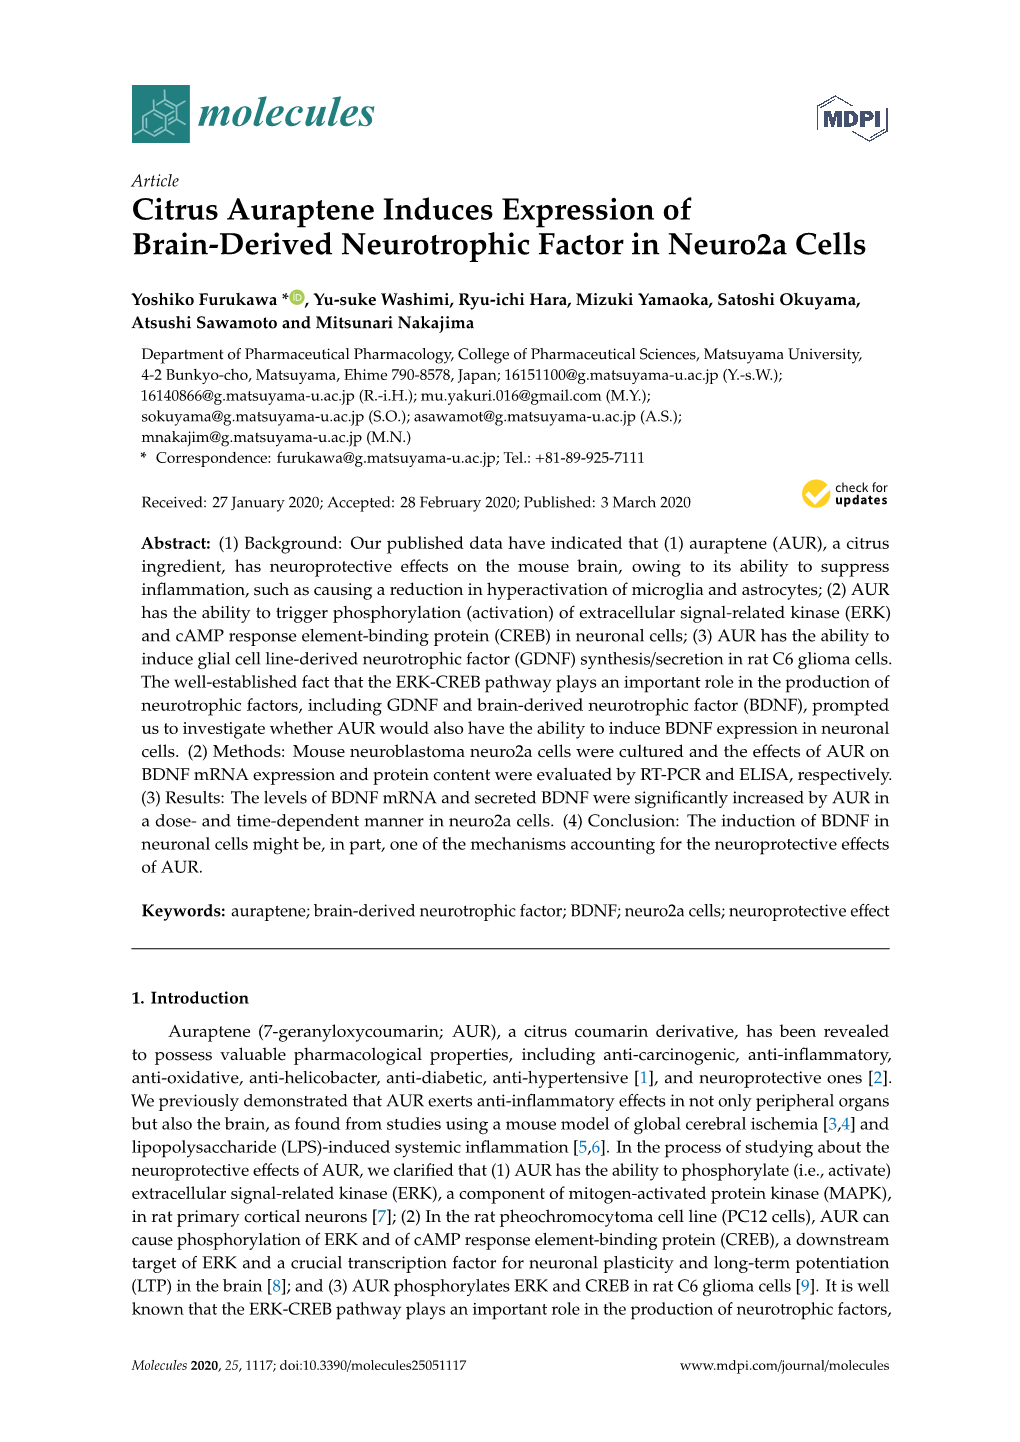 Citrus Auraptene Induces Expression of Brain-Derived Neurotrophic Factor in Neuro2a Cells